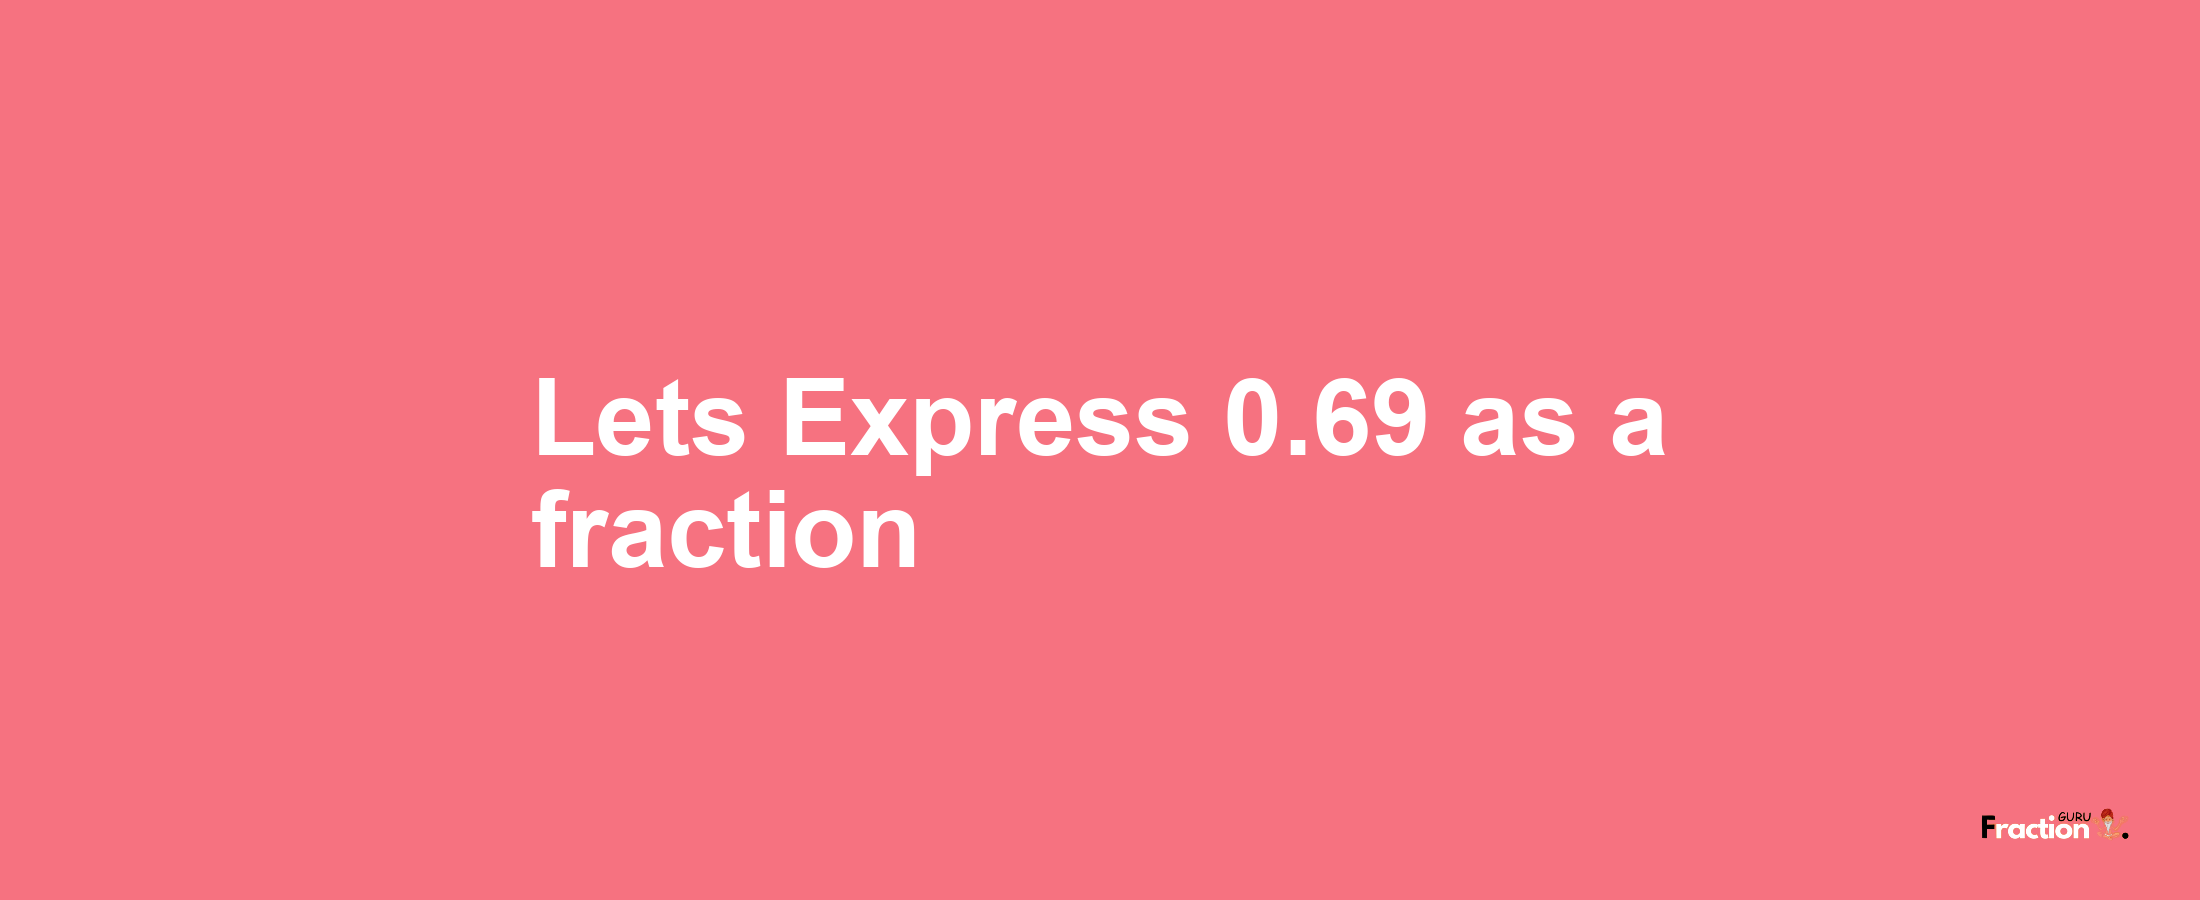 Lets Express 0.69 as afraction